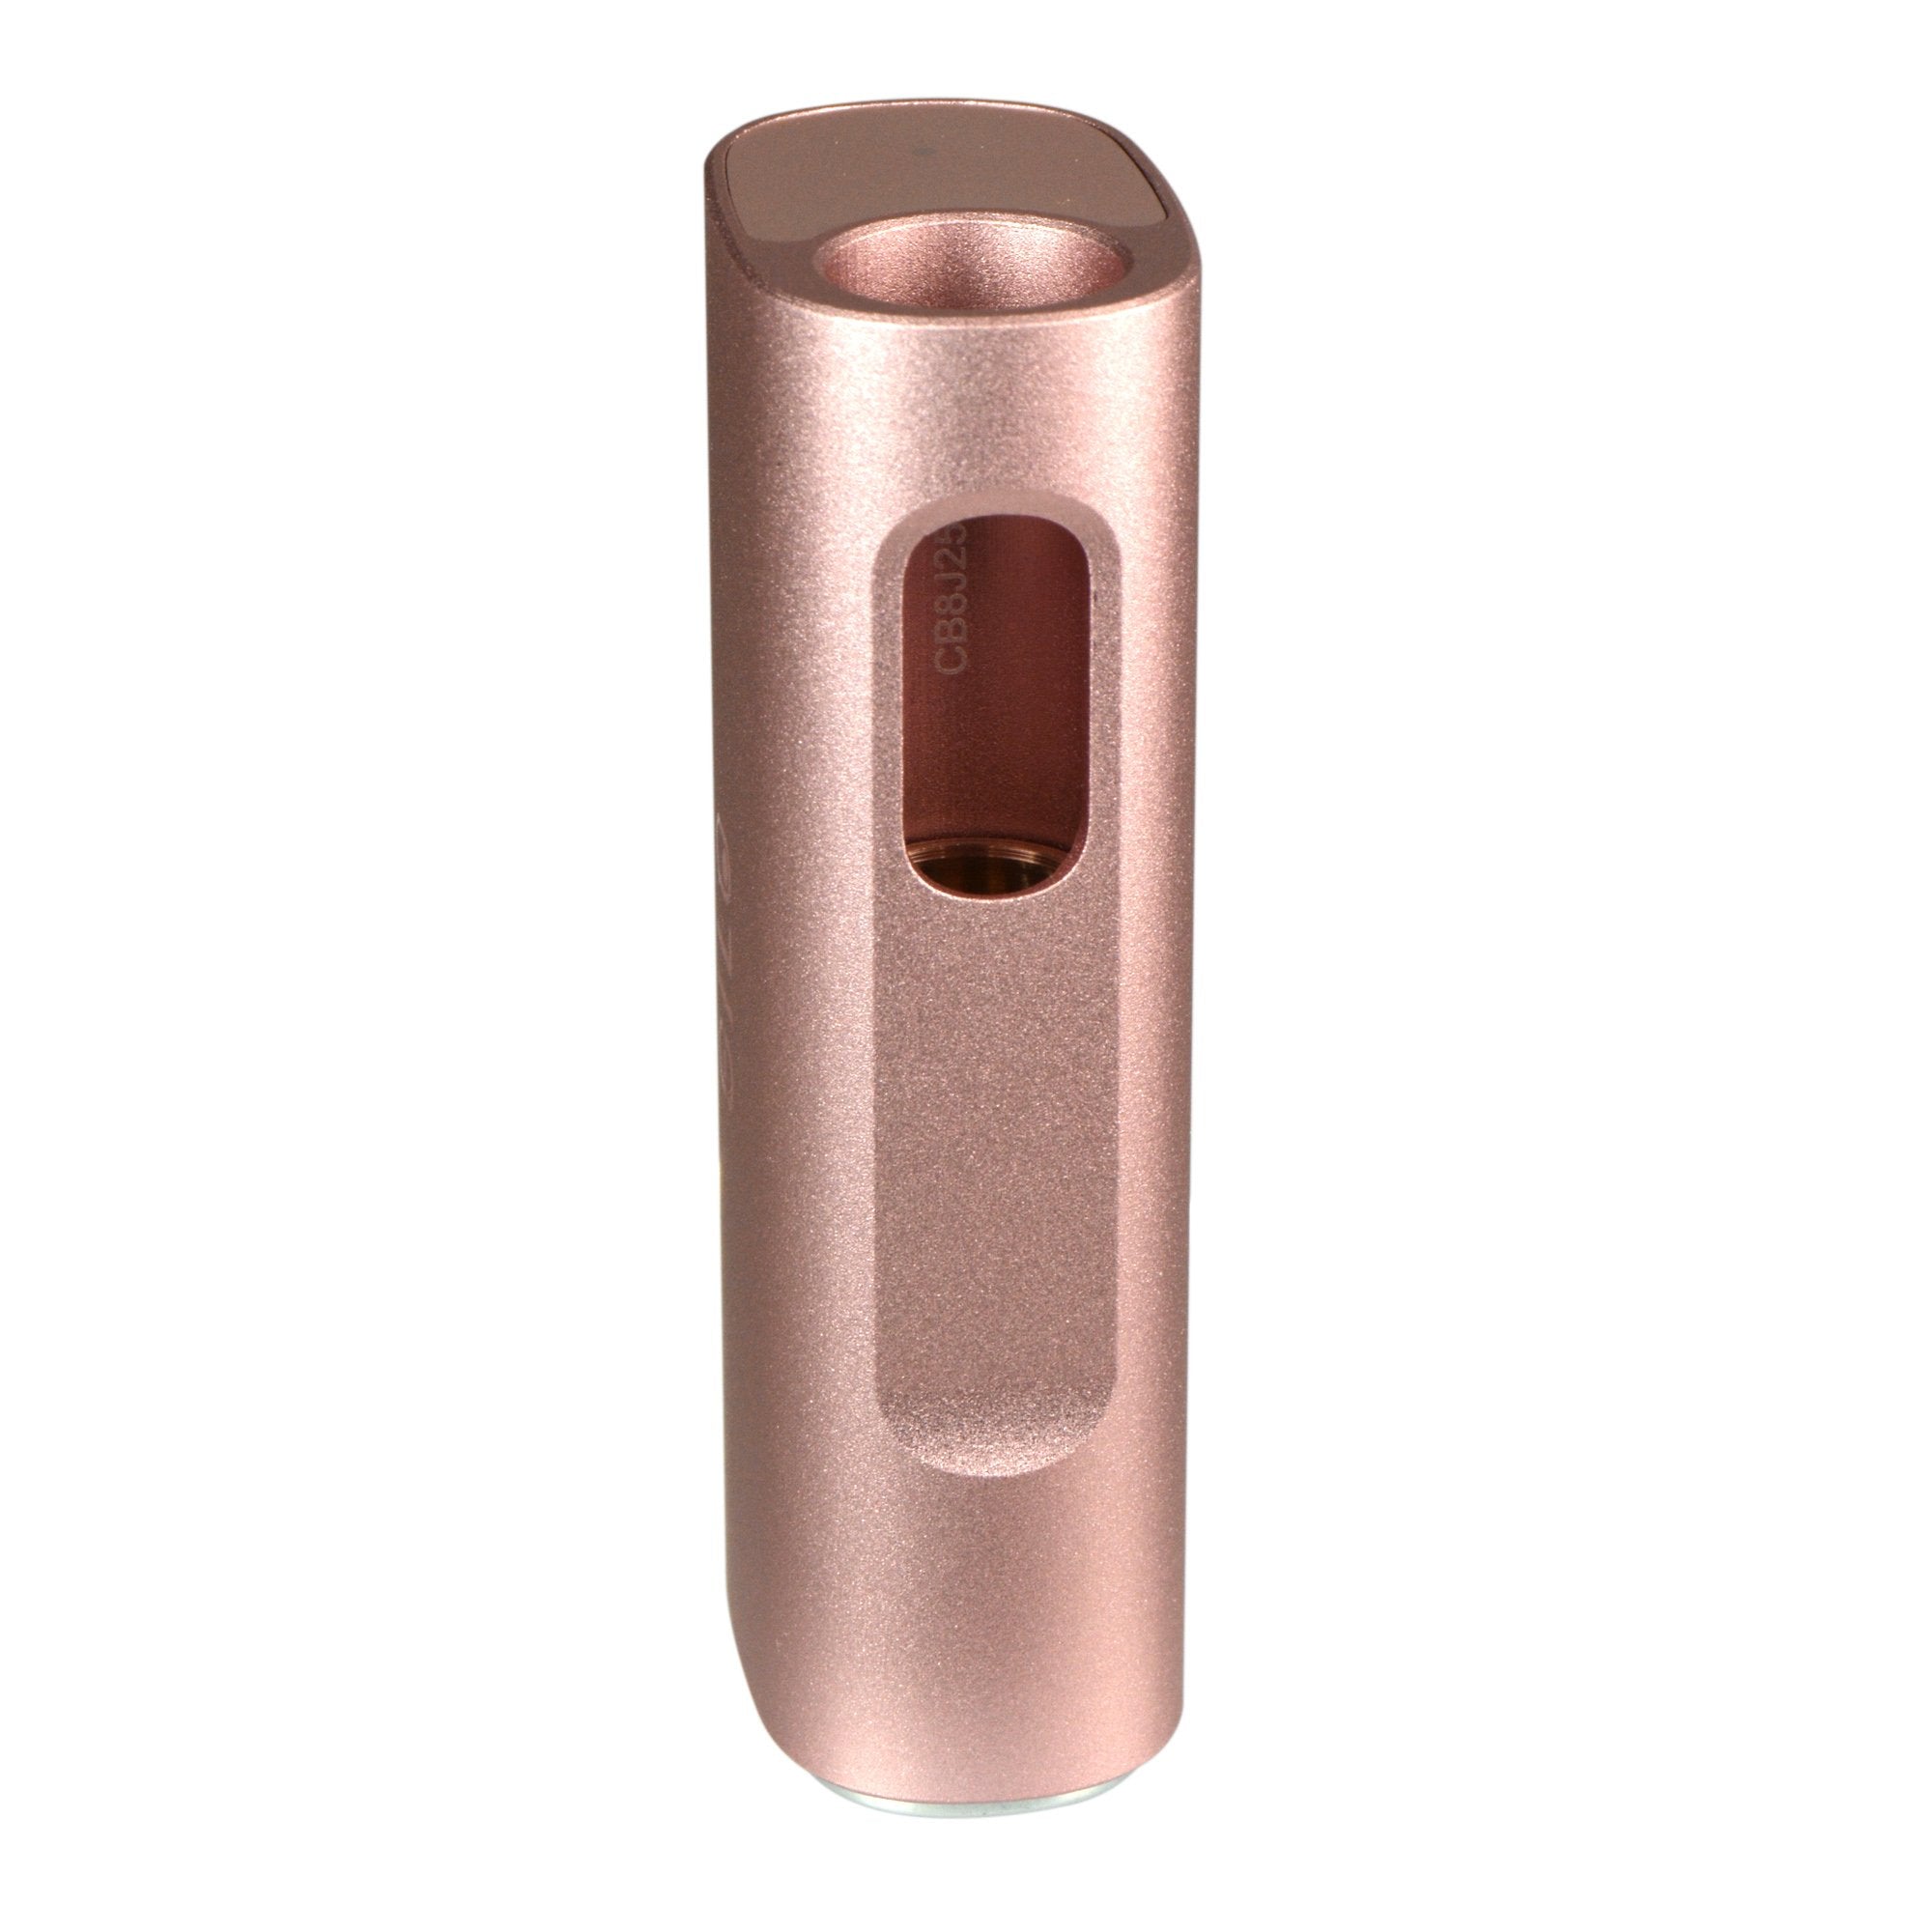 CCELL | Silo Vape Battery with USB Charger | 500mAh - Rose - 510 Thread - 5